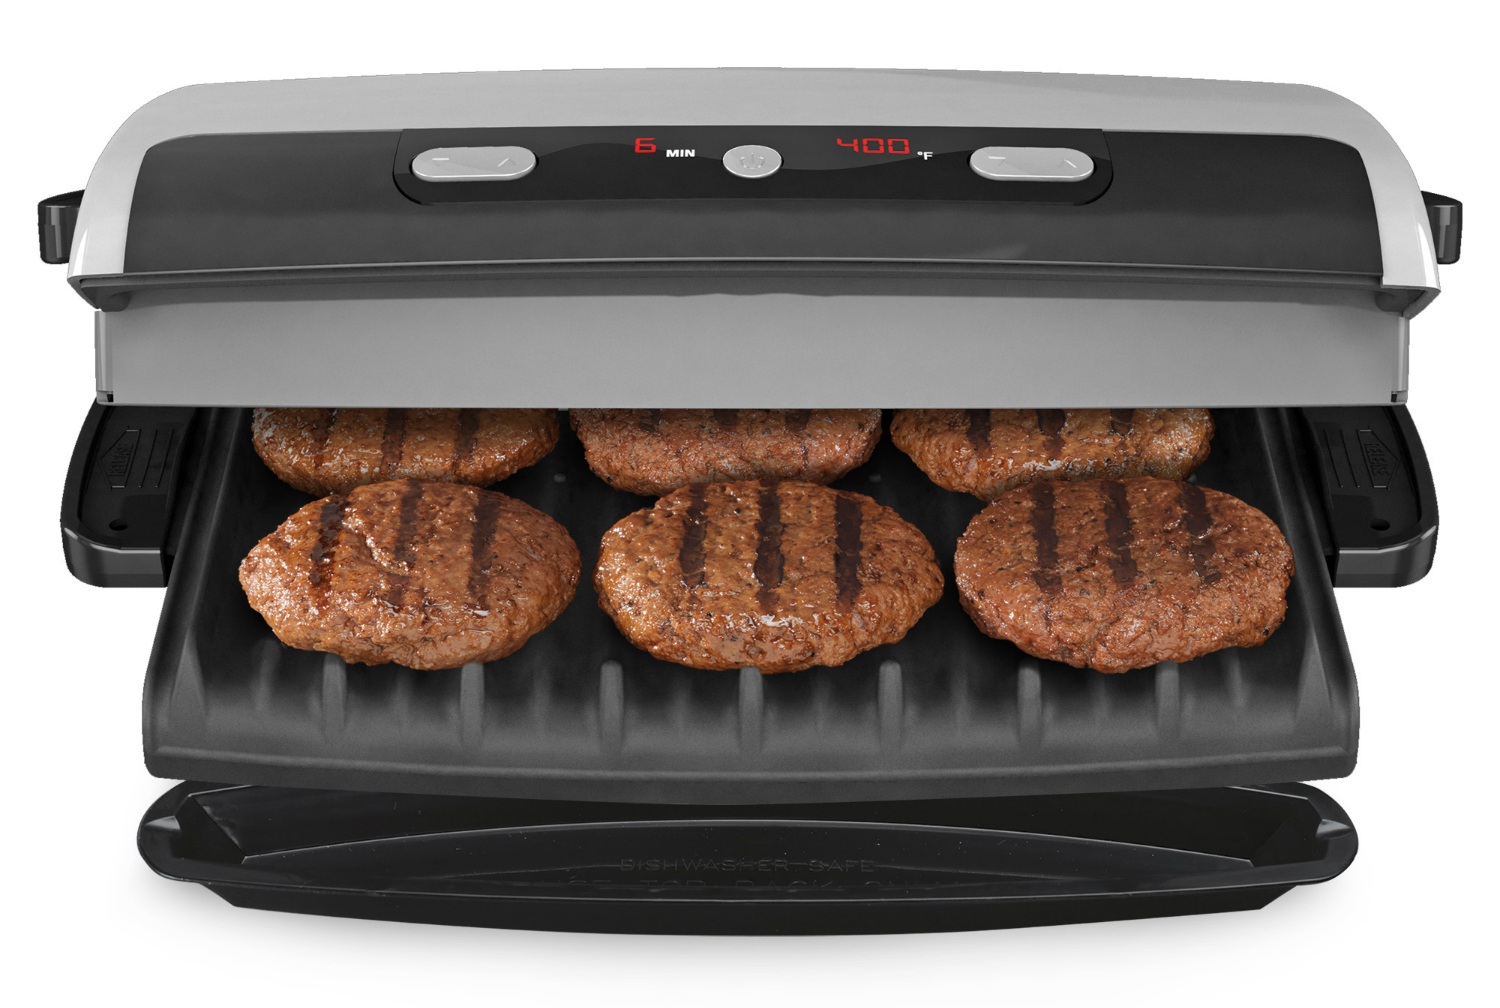 https://www.digitaltrends.com/wp-content/uploads/2019/05/george-foreman-6-serving-removable-plate-electric-grill-and-panini-press-1.jpg?p=1